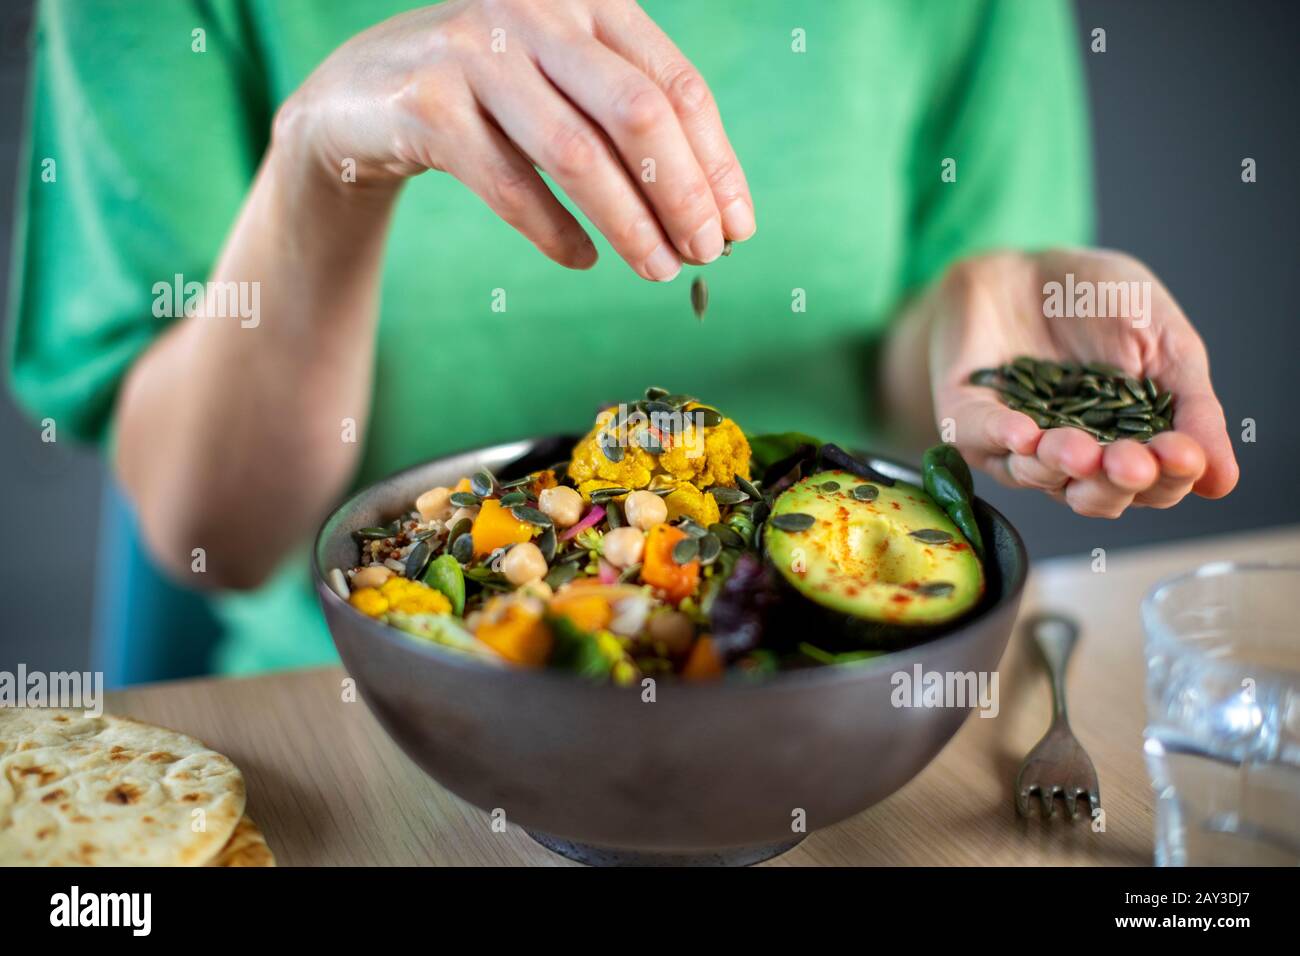 Close Up Of Woman Adding Pumpkin Seeds To Healthy Vegan Meal In Bowl Stock Photo